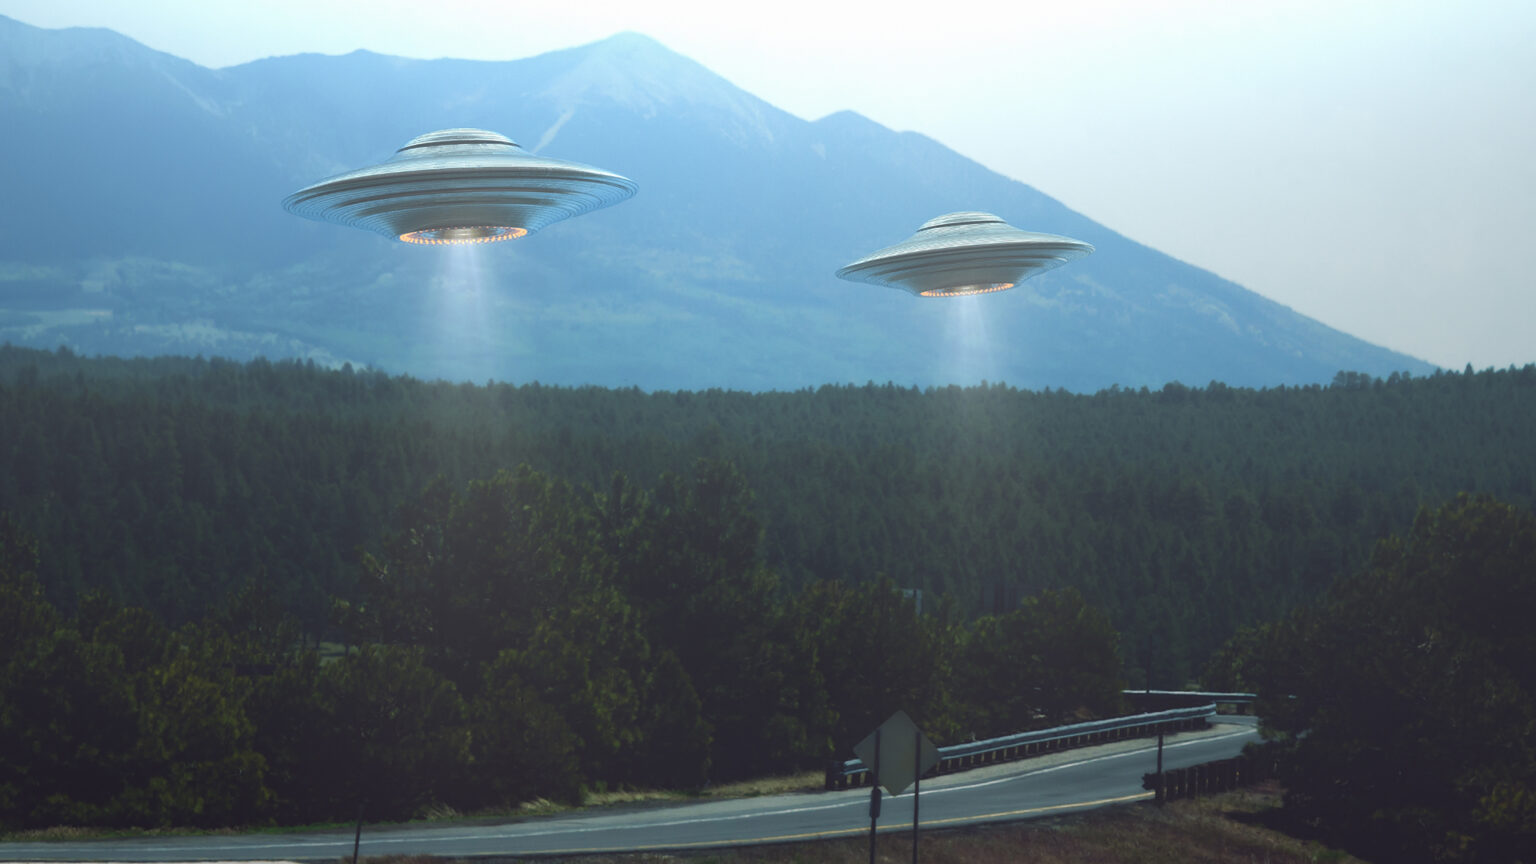 How does your state compare in UFO sightings? Find out which states rank the highest for UFO sightings and how you can learn to spot them.